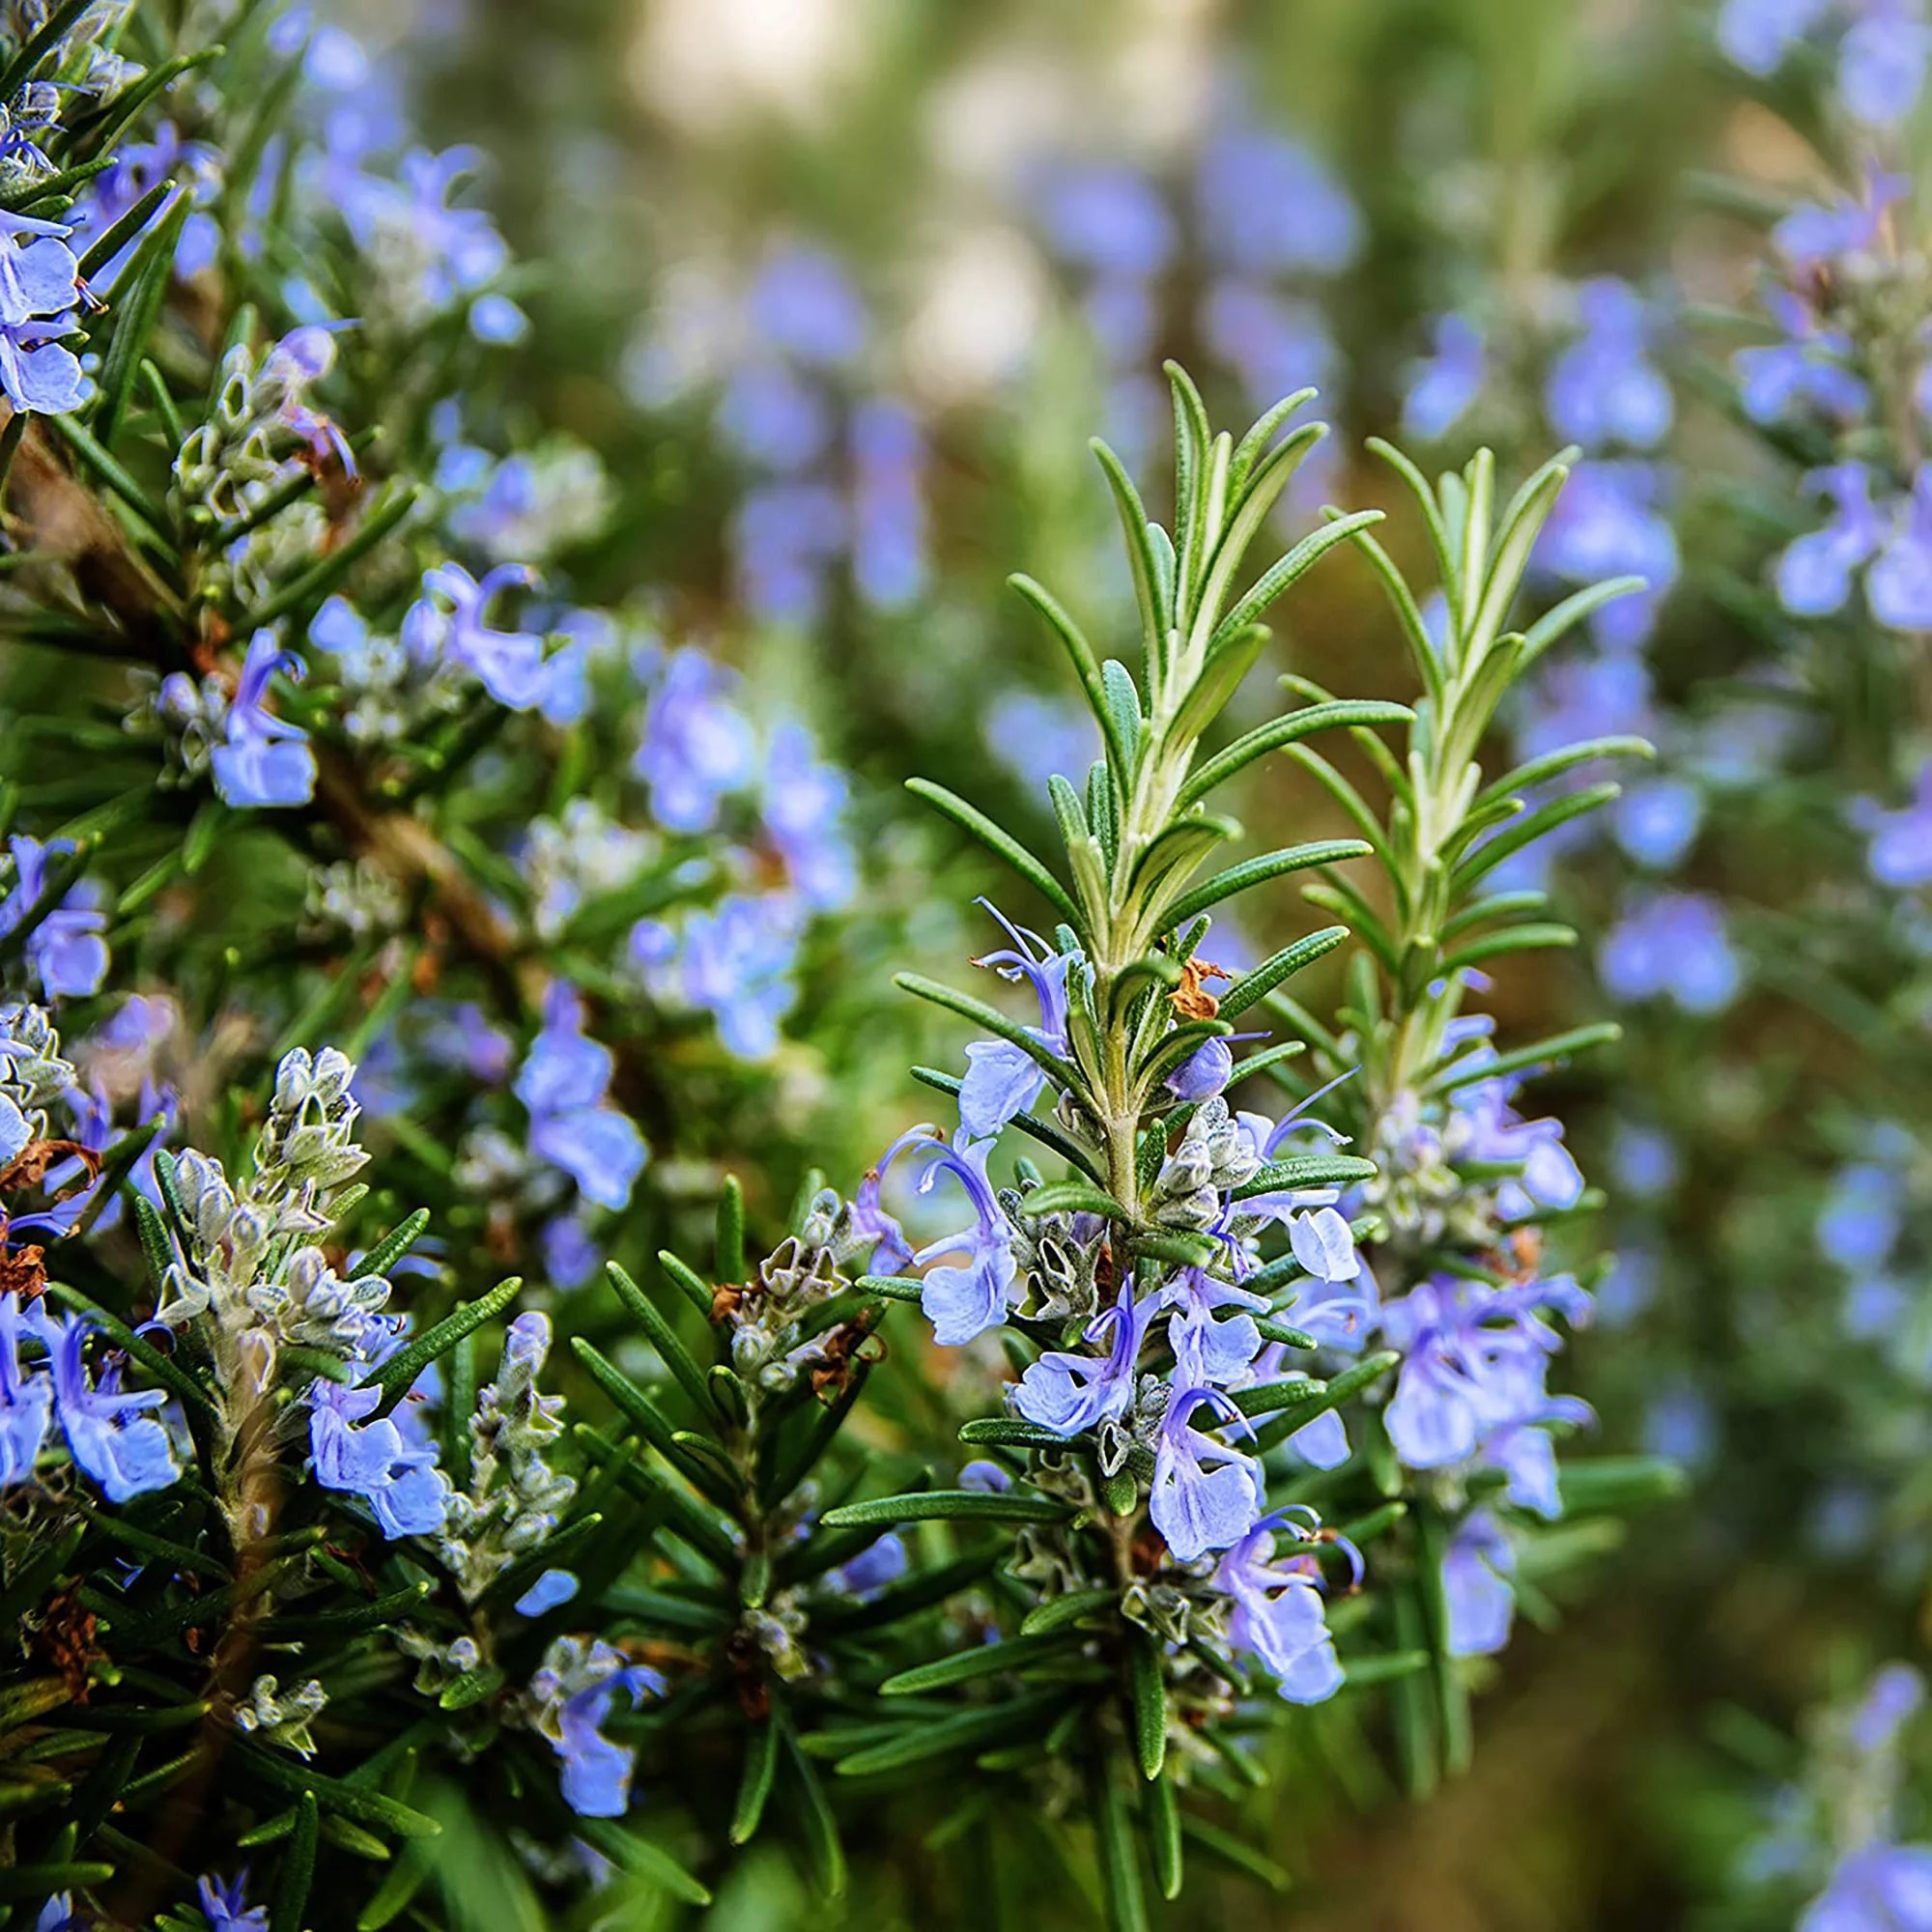 Add rosemary to your skincare routine